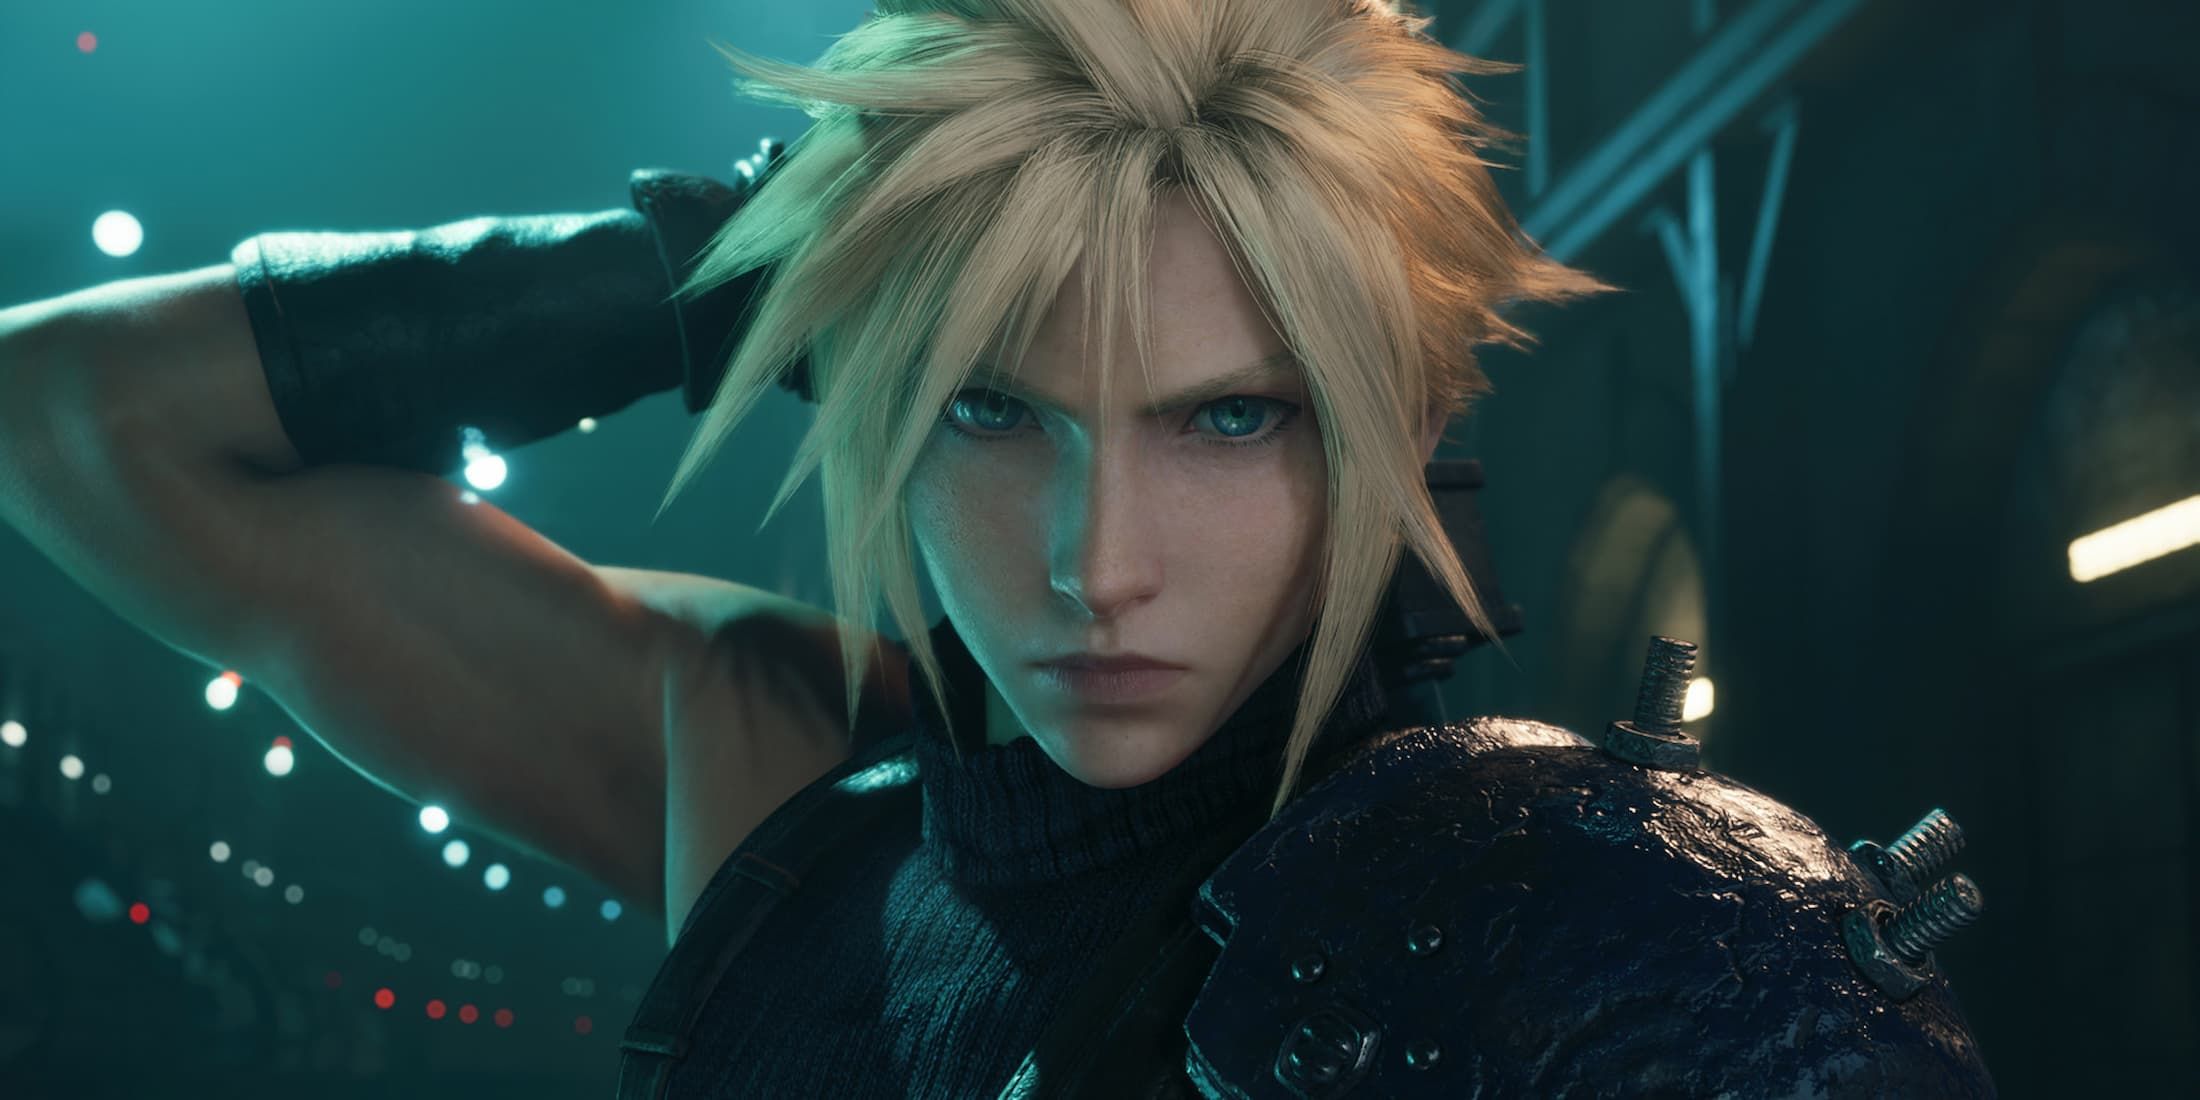 Cloud in the FF7 Remake